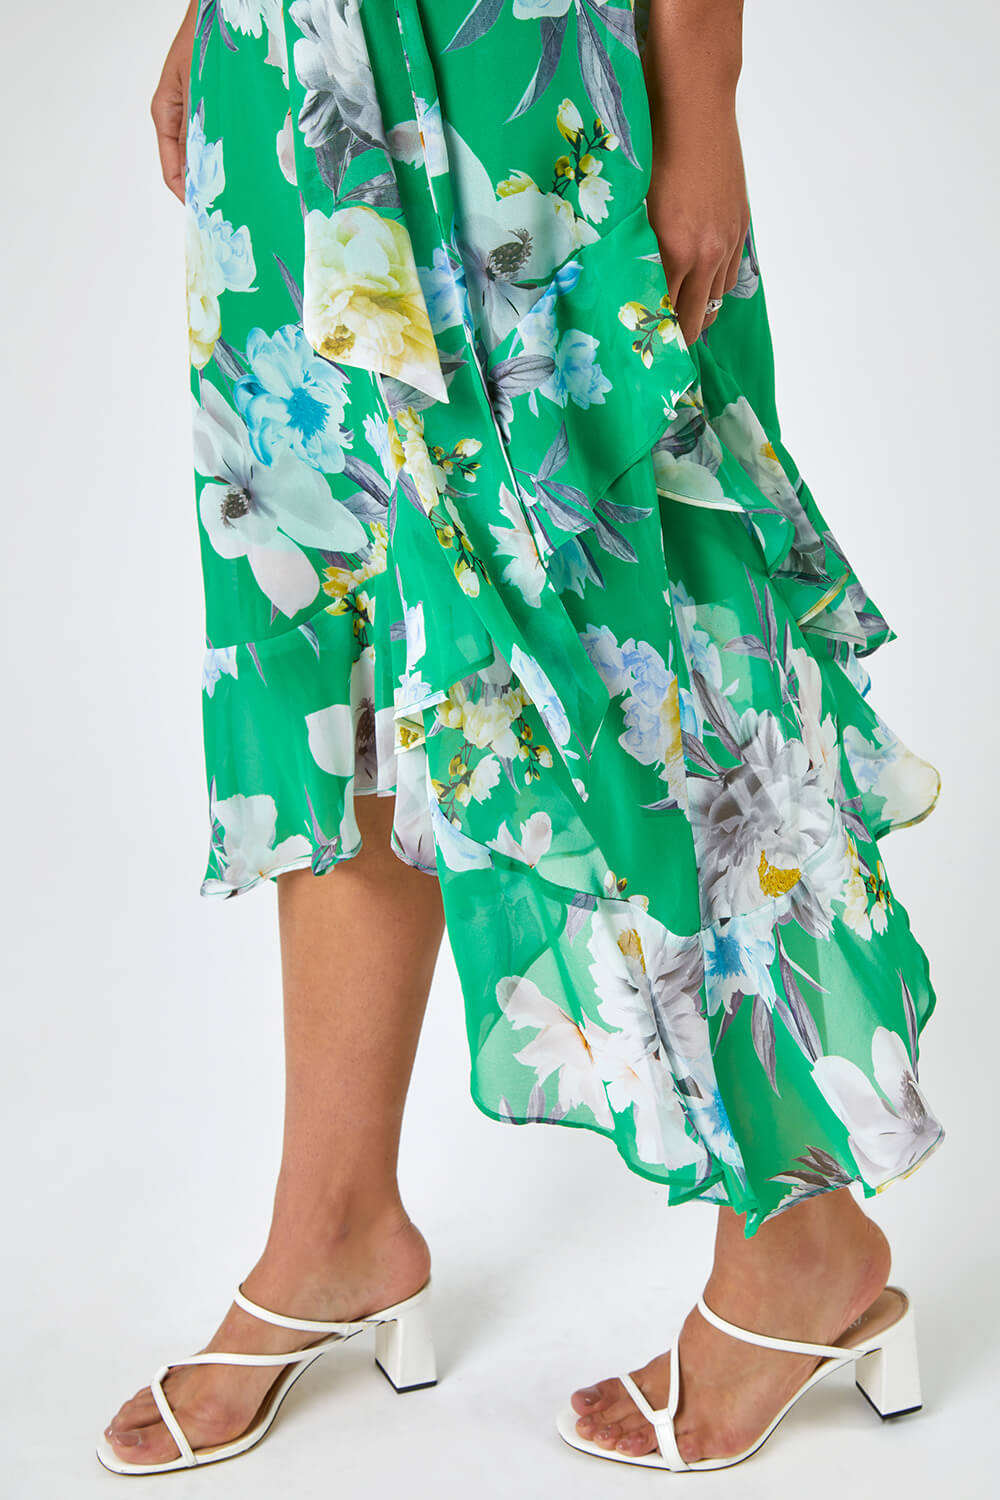 Green Floral Asymmetric Belted Midi Dress, Image 4 of 5